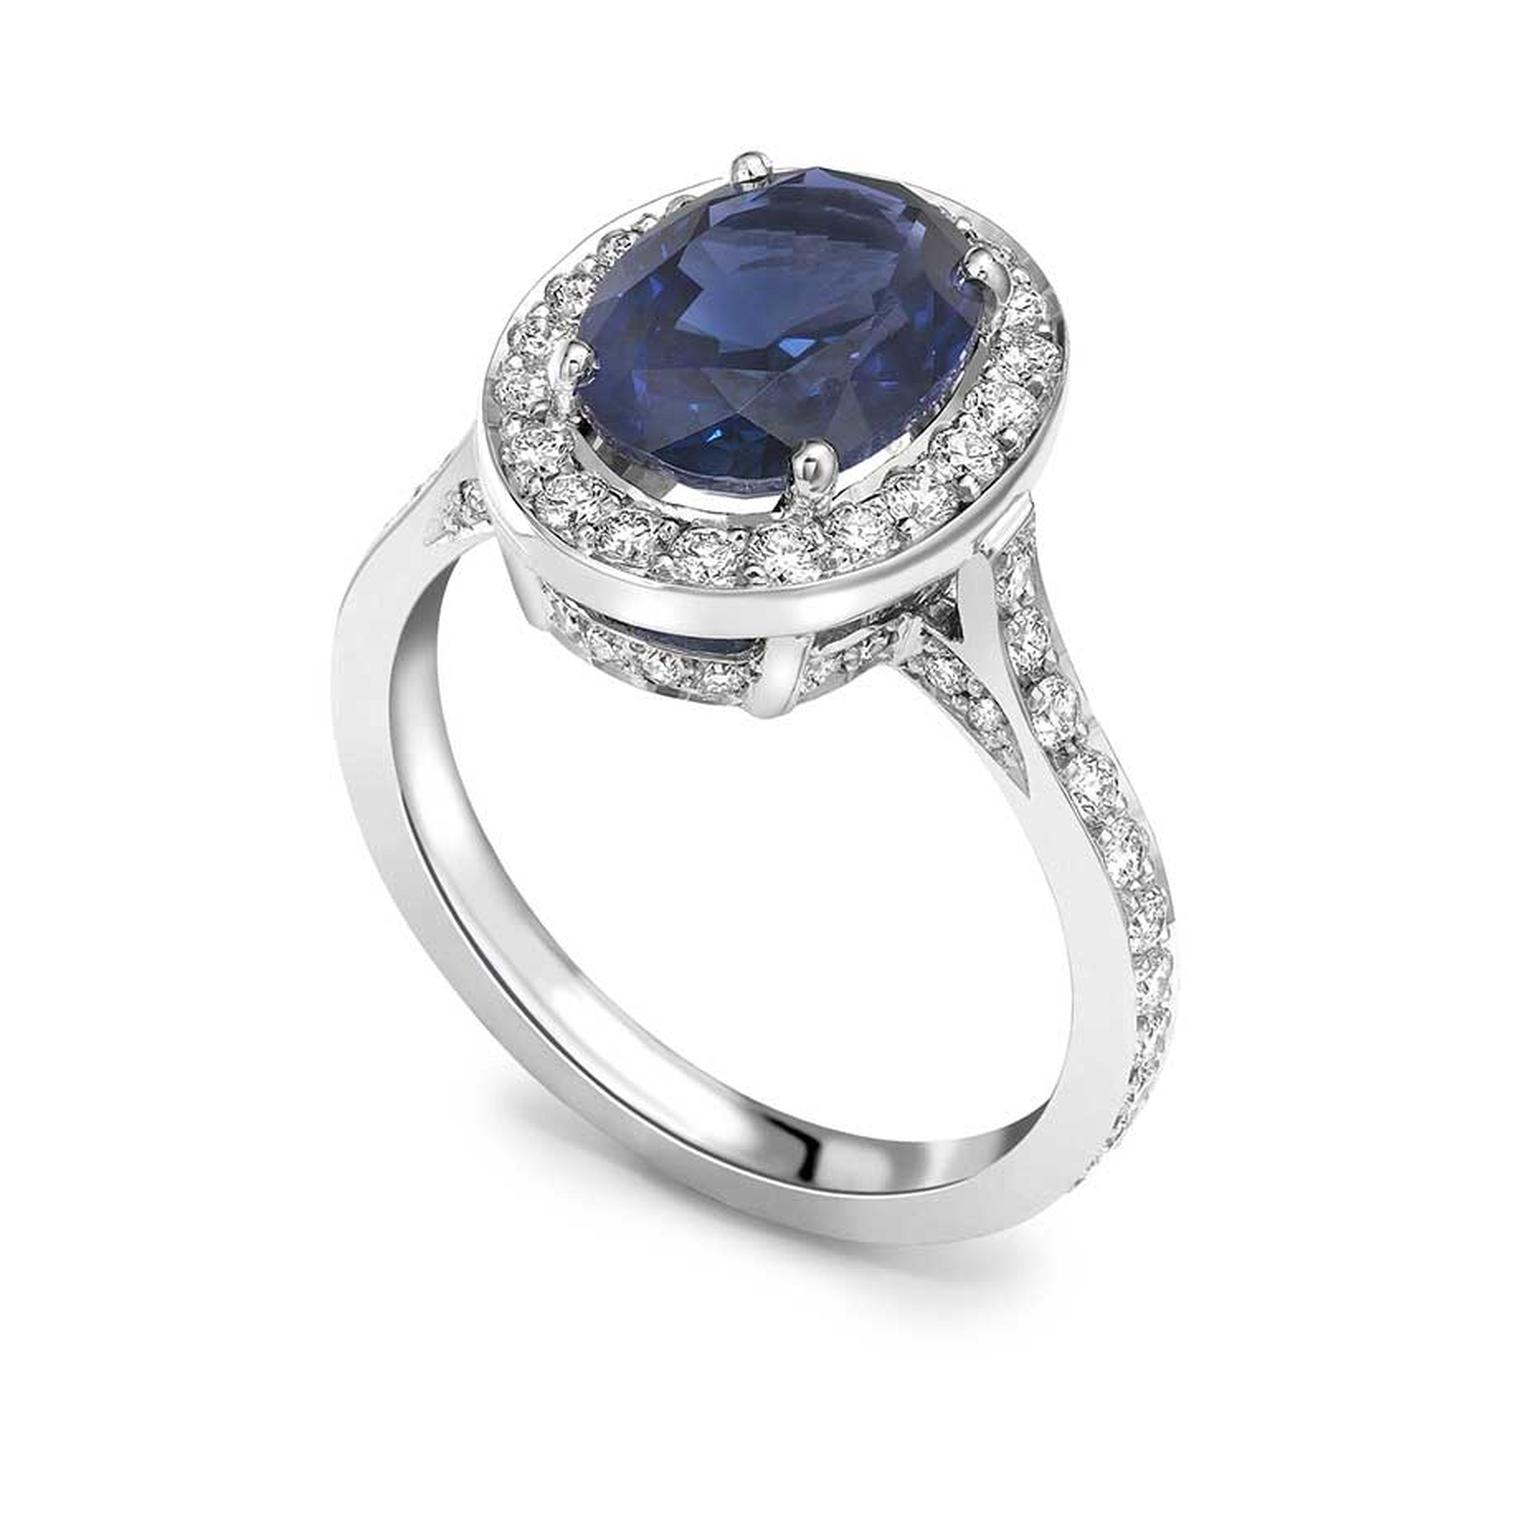 Theo Fennell sapphire engagement ring in white gold, set